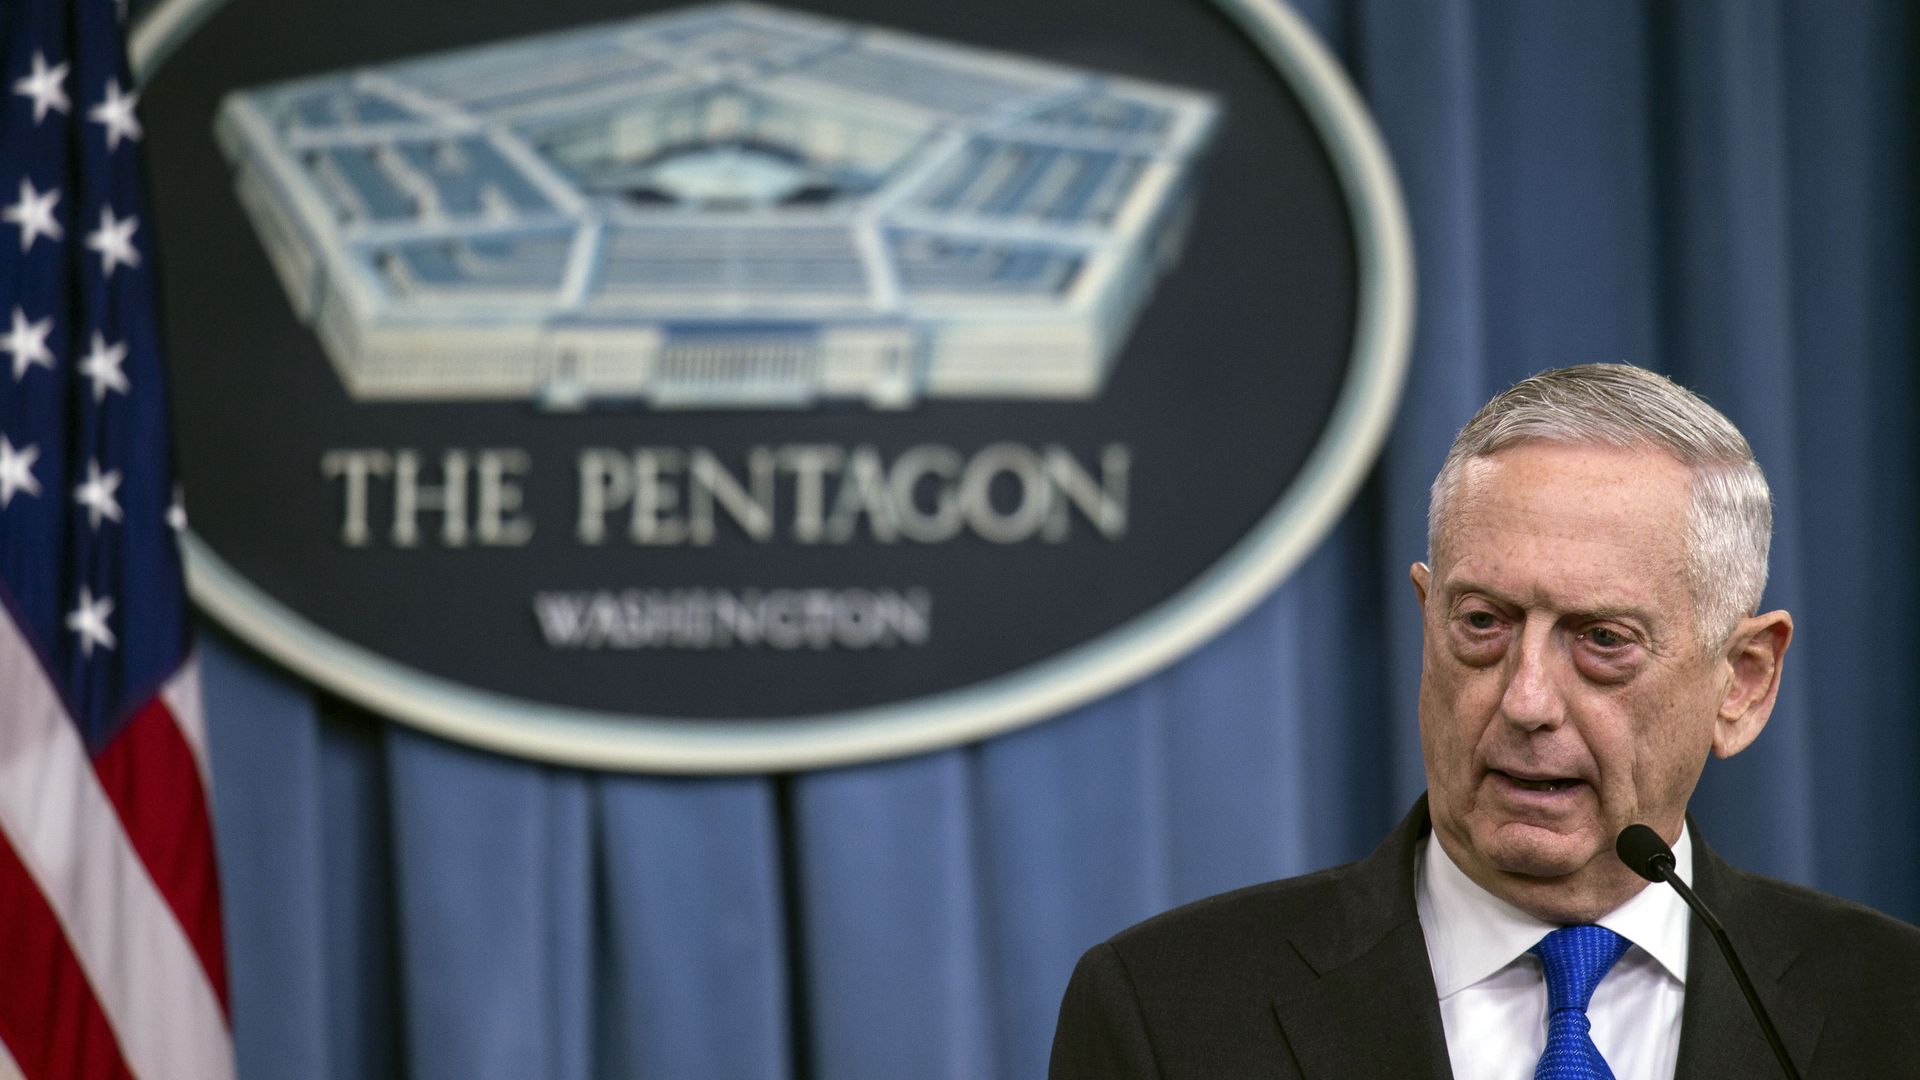 Defense Secretary Jim Mattis holds a press conference at the Pentagon on August 28, 2018.